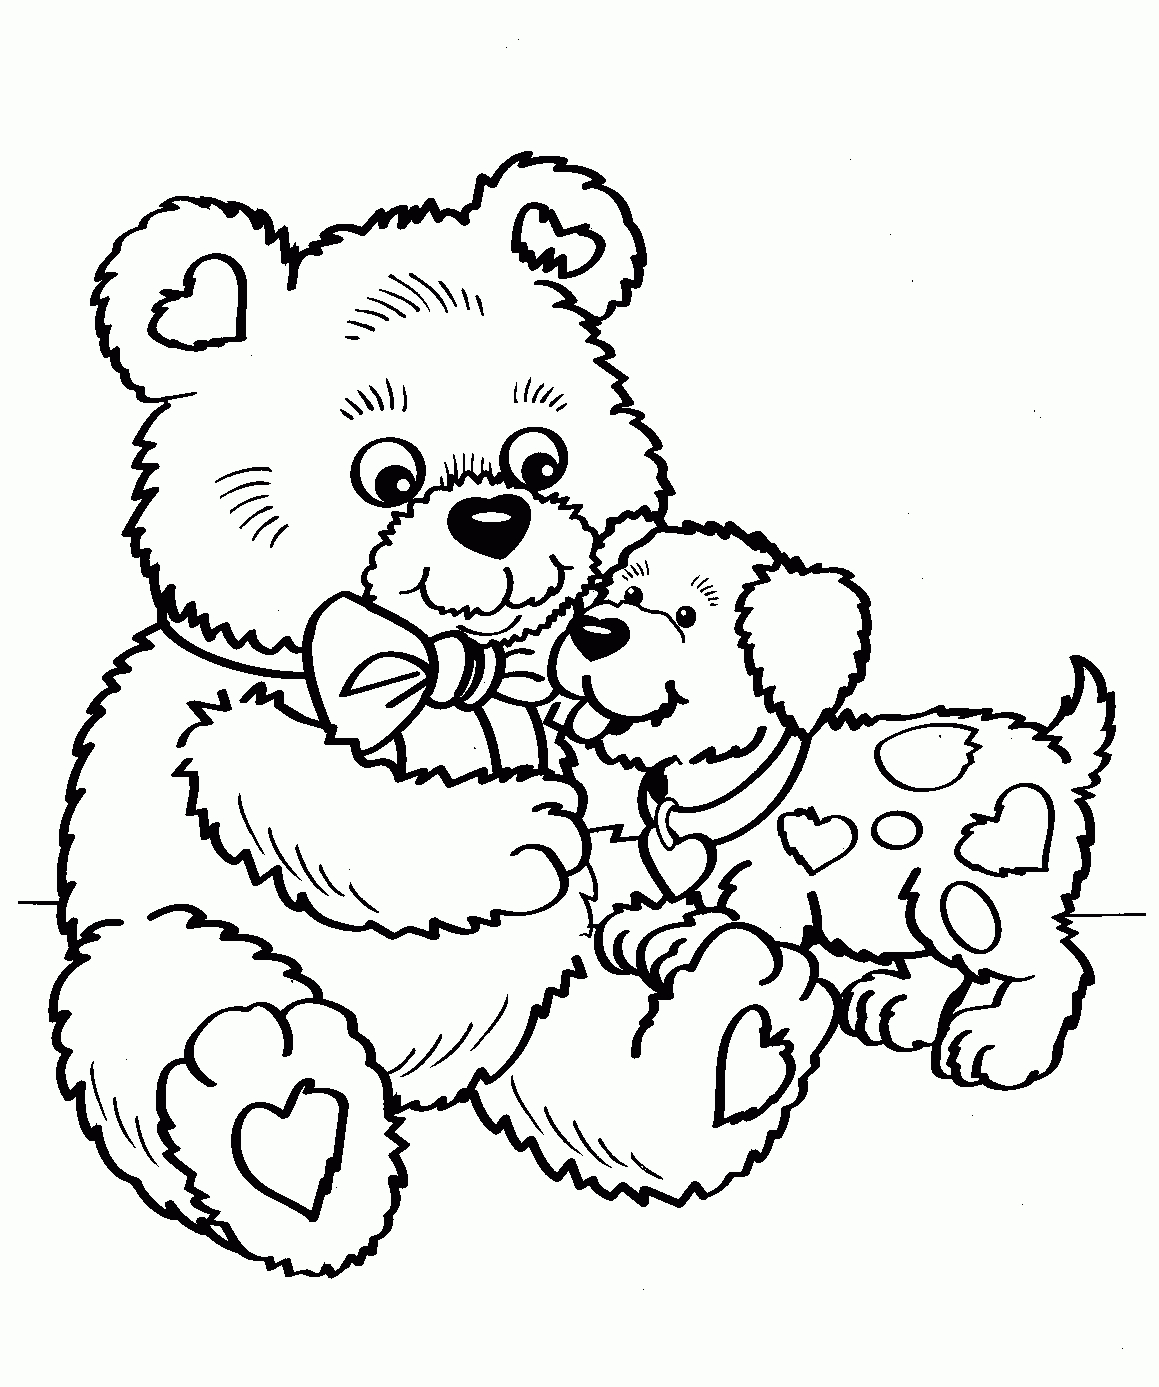 Valentine Coloring Book Pages Coloring Book World Coloring Book World Freele Valentine Pages For